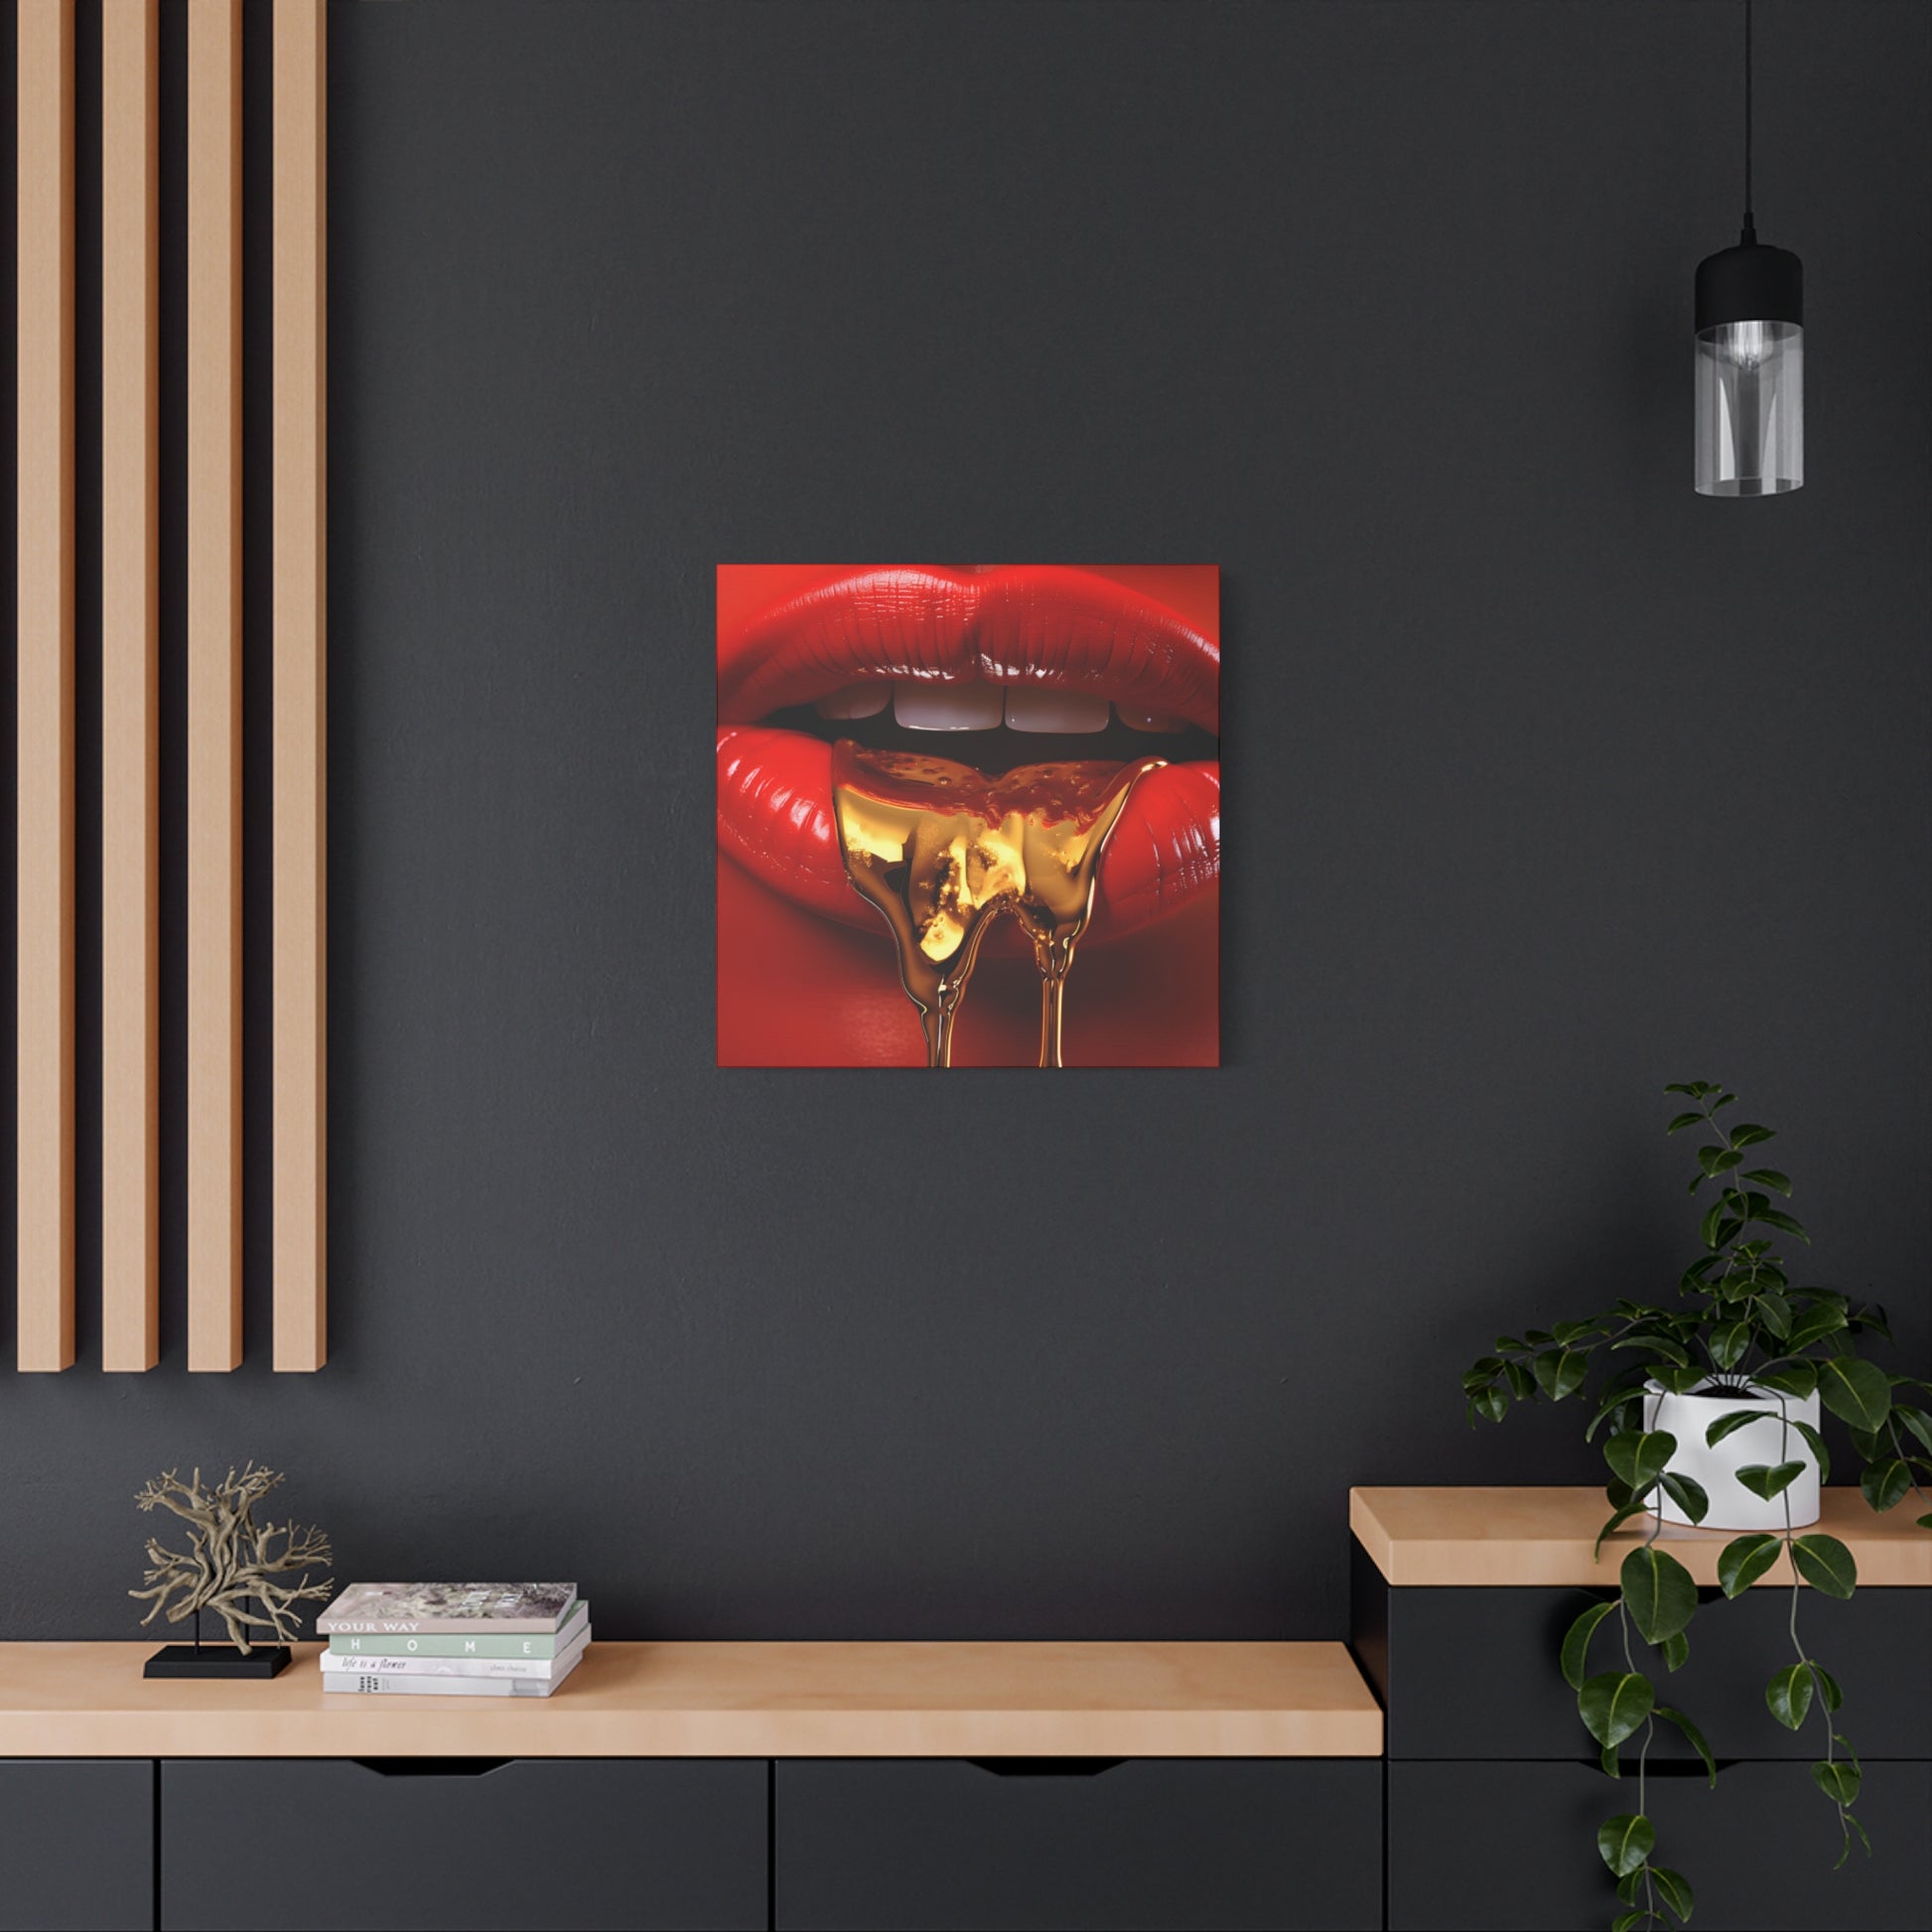 elegant in situ Golden Seduction by Cassian Marlowe, wall art depicting glossy red lips and molten gold, symbolizing allure and ambition in the theme of opulence